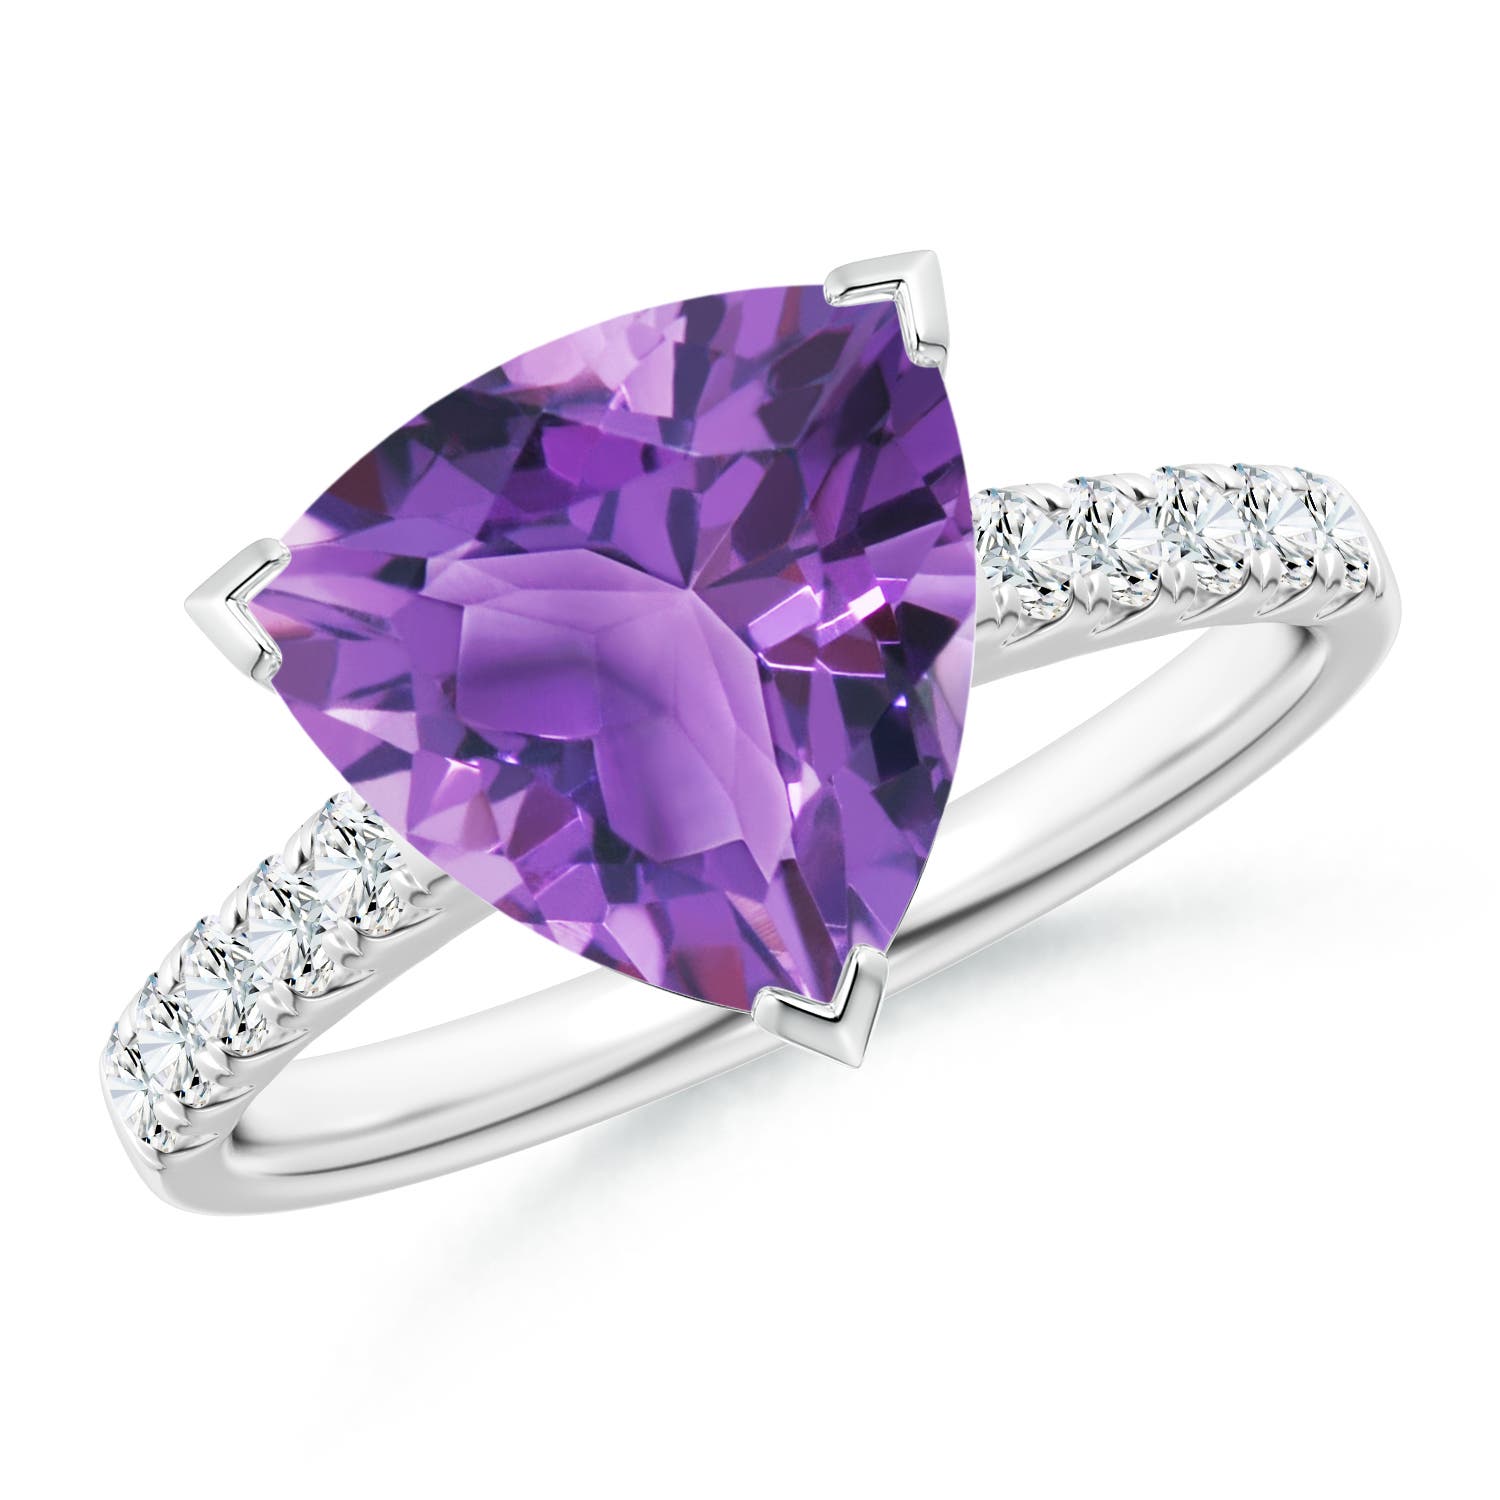 AA - Amethyst / 2.95 CT / 14 KT White Gold